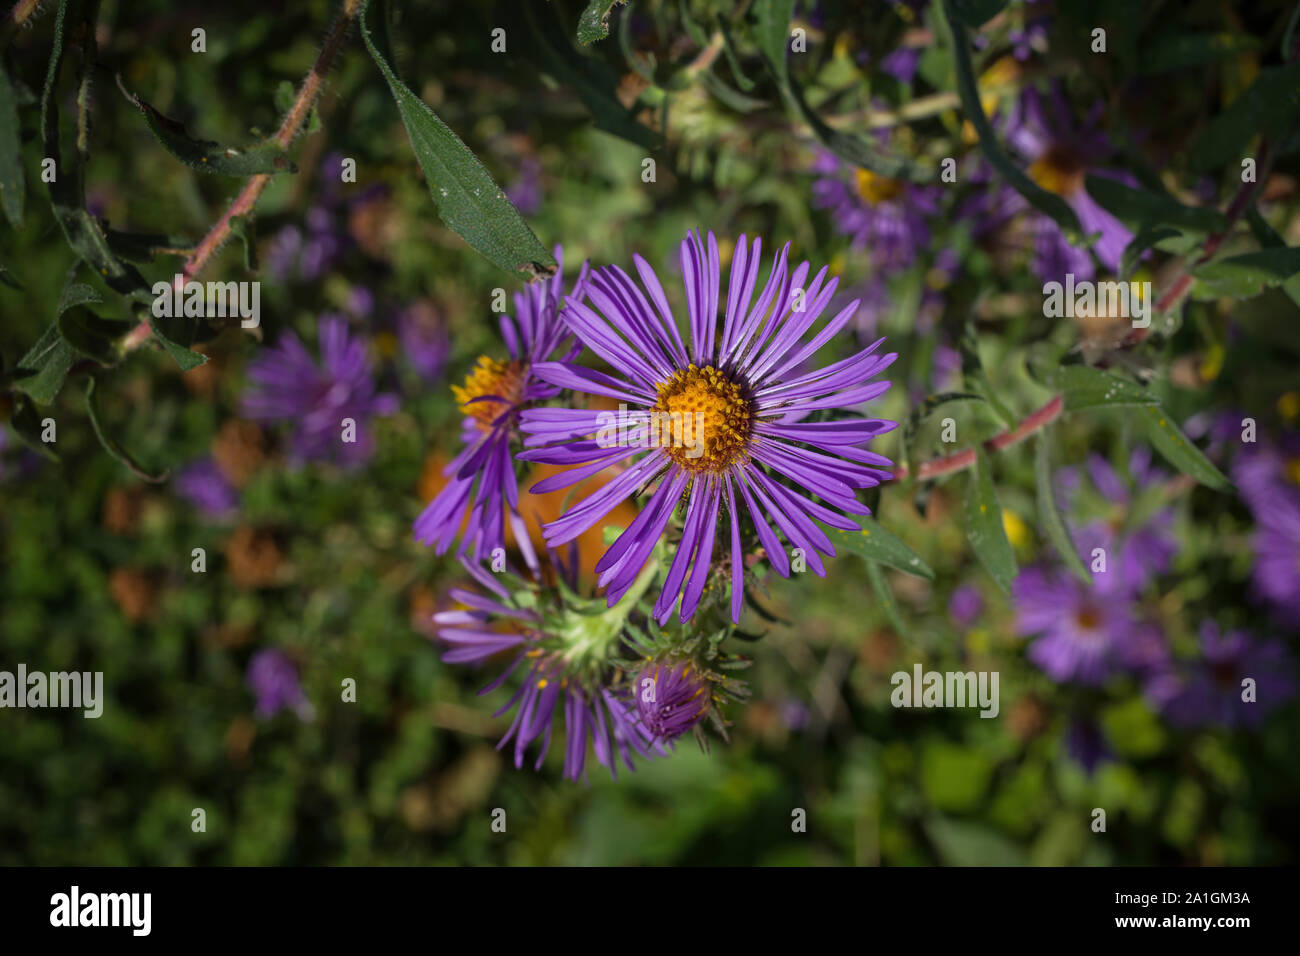 New England aster in an early autumn garden. Known as Symphyotrichum novae-angliae, hairy Michaelmas-daisy, or Michaelmas daisy. Stock Photo